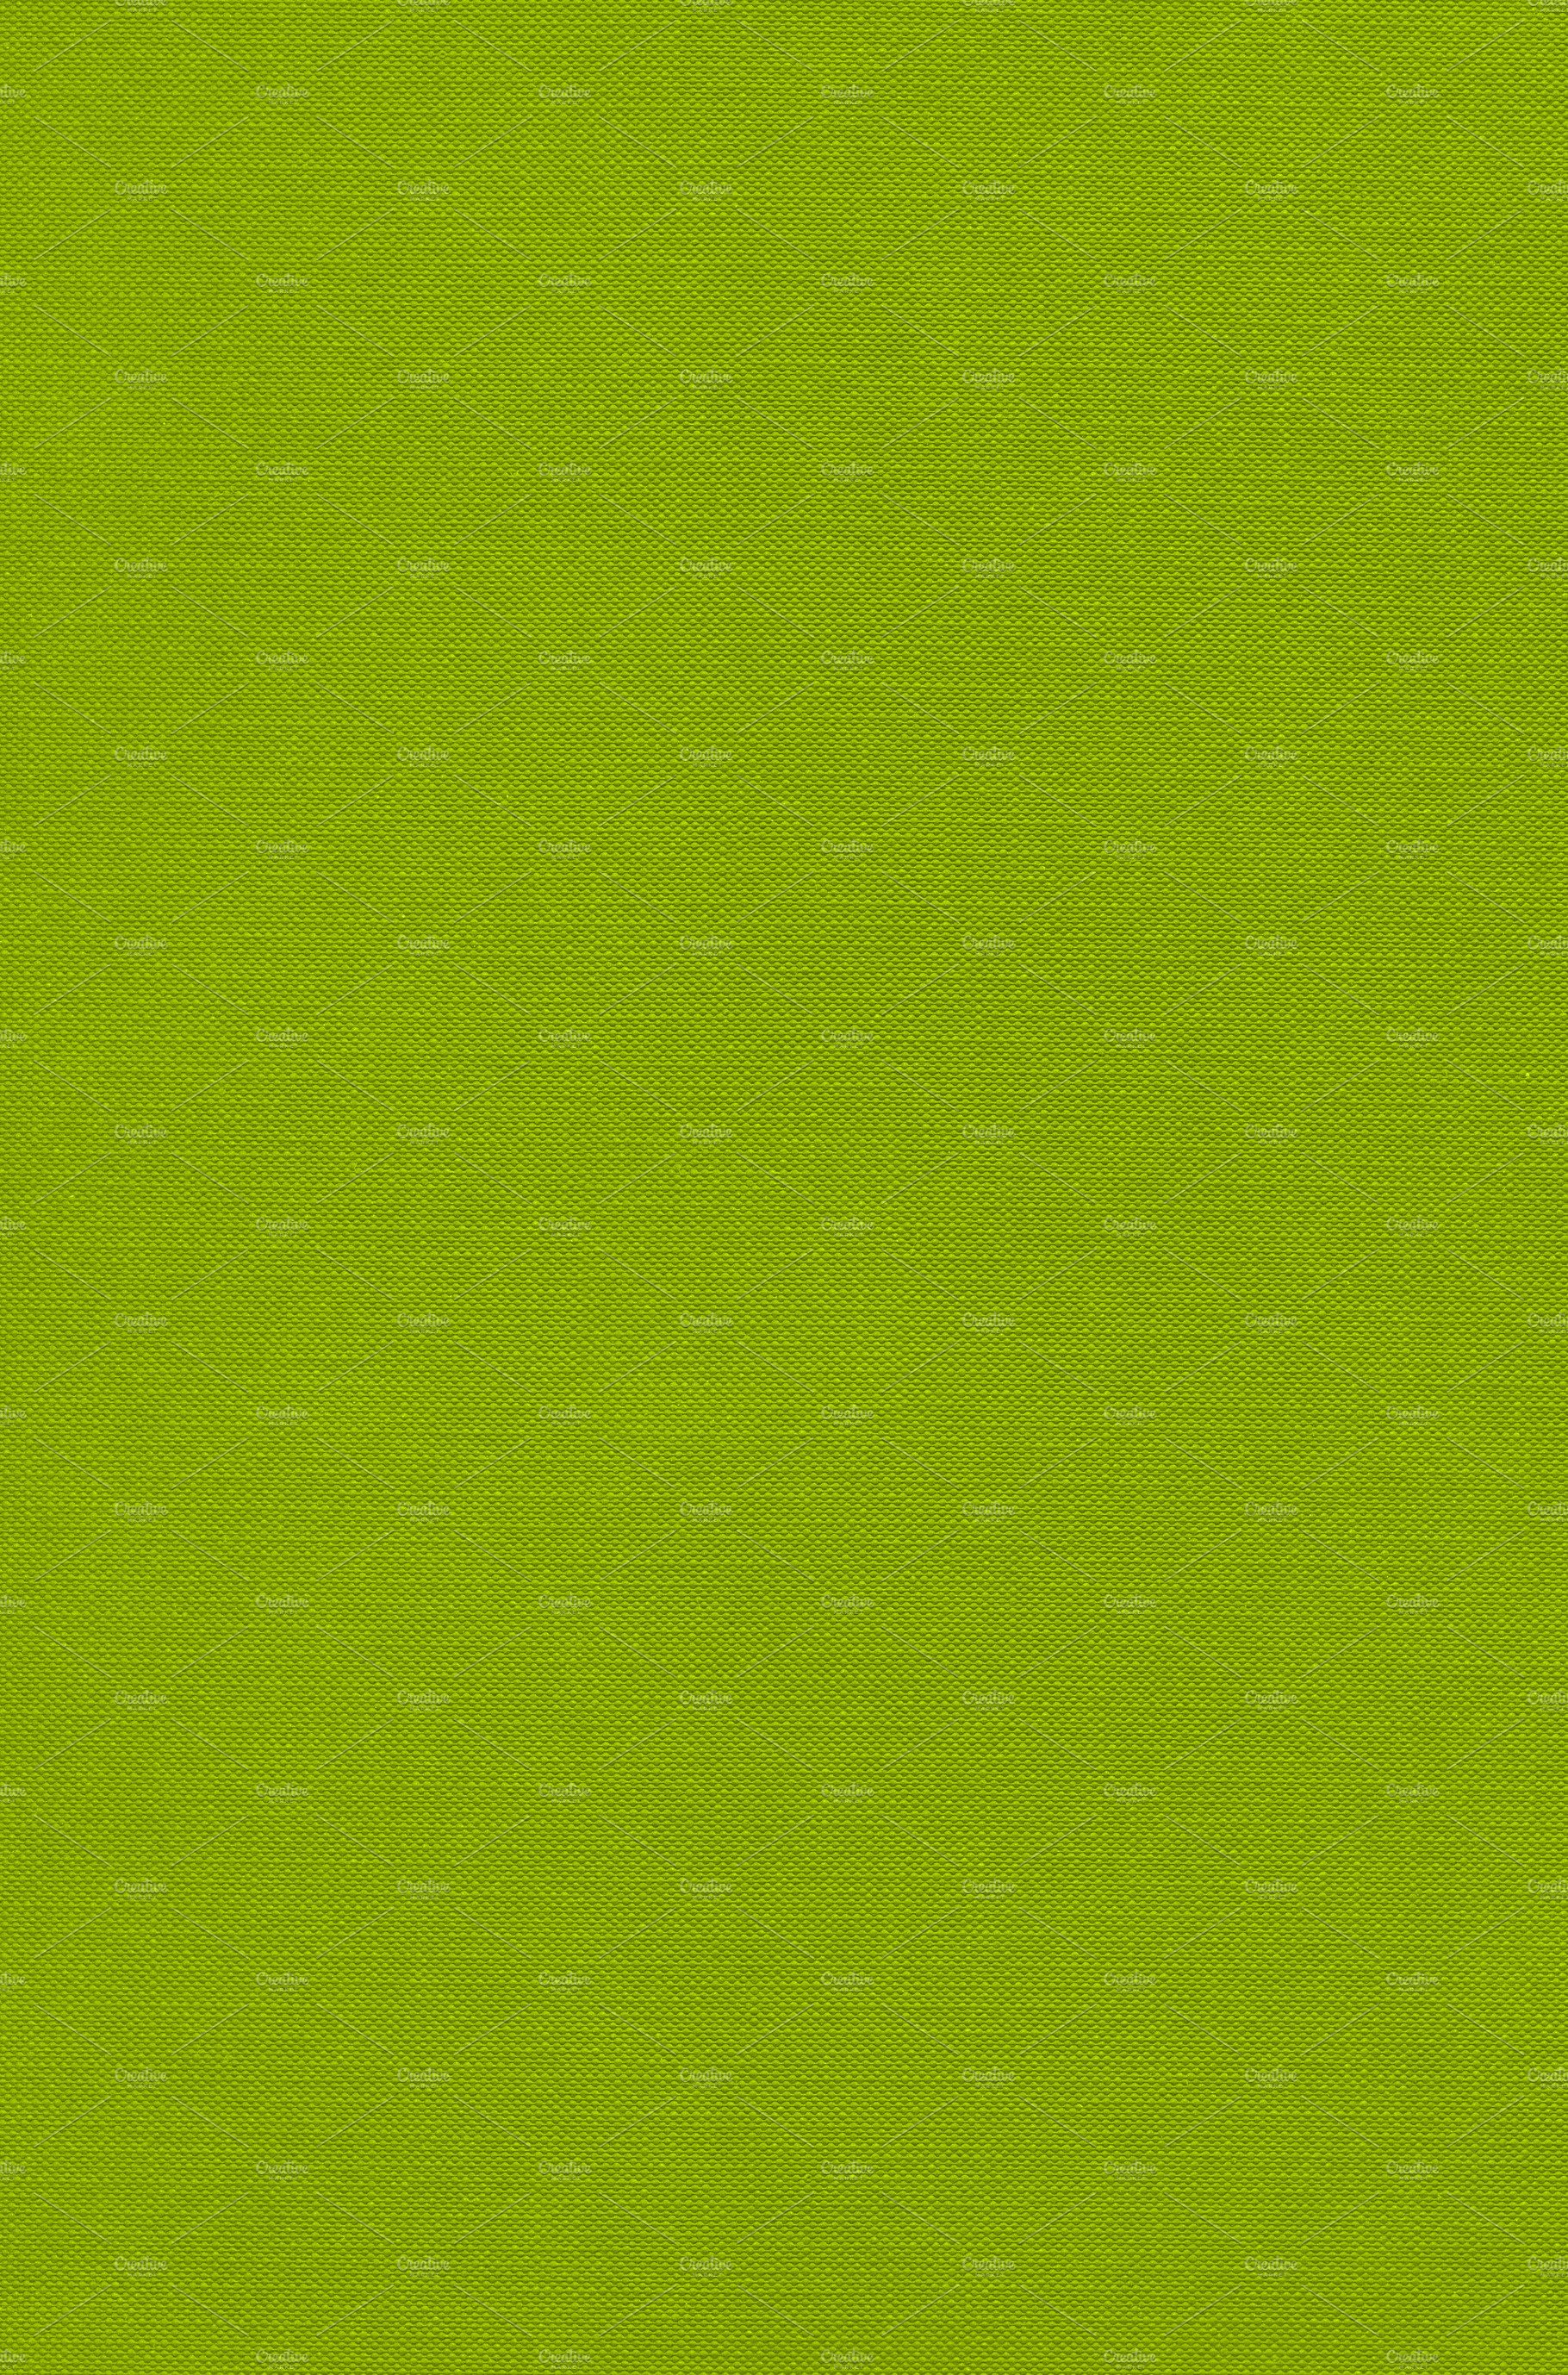 Green canvas texture background preview image.